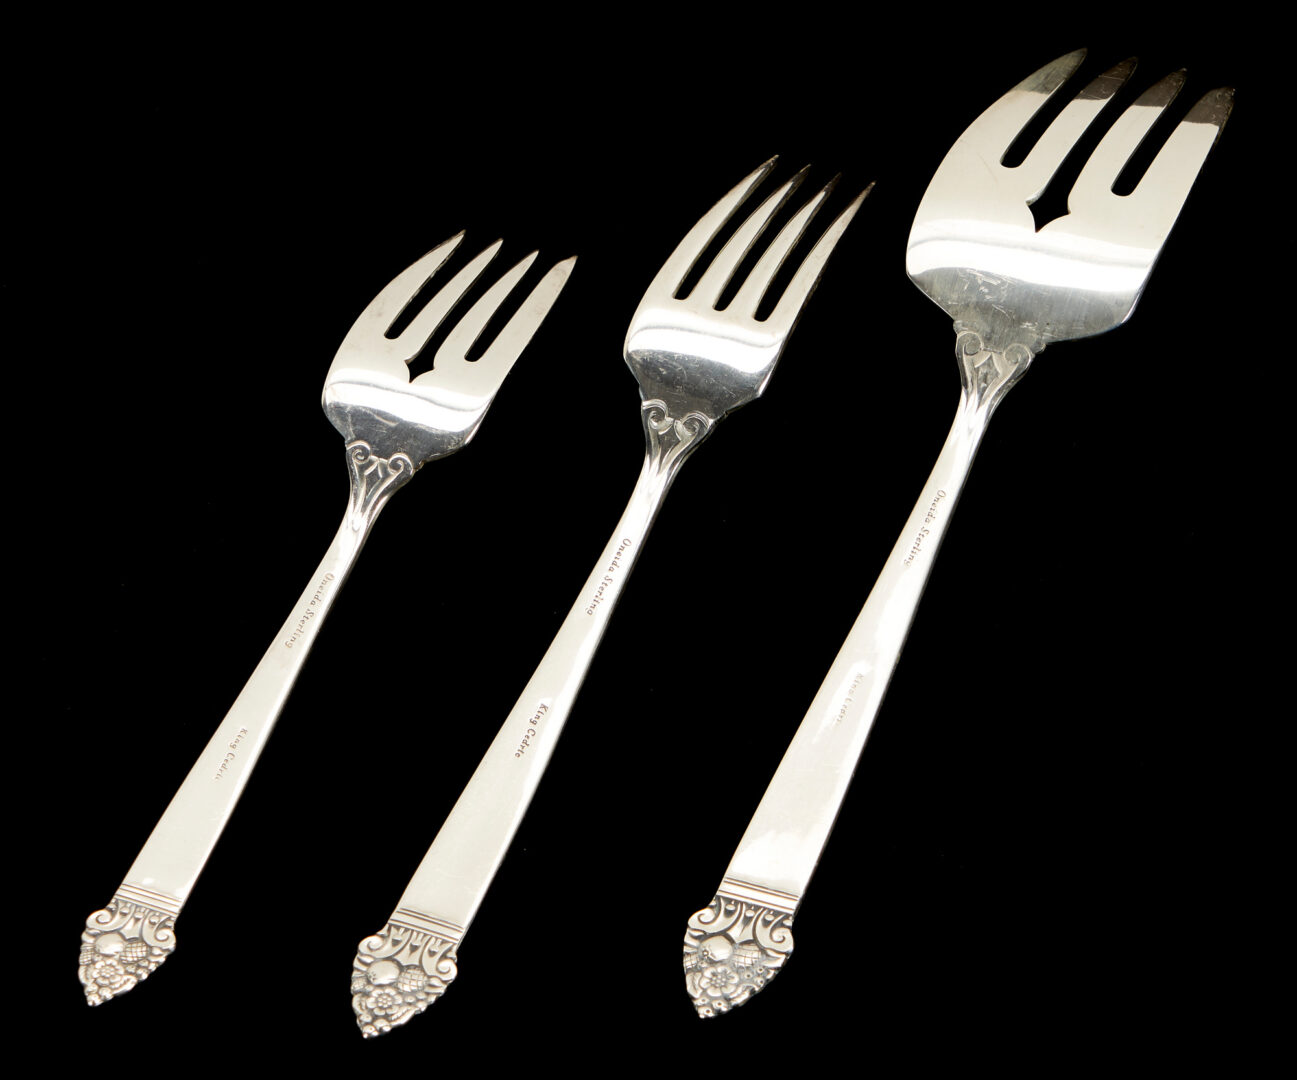 Lot 1008: 47 Pcs. Sterling Silver Flatware, incl. Oneida King Cedric, Service for 6